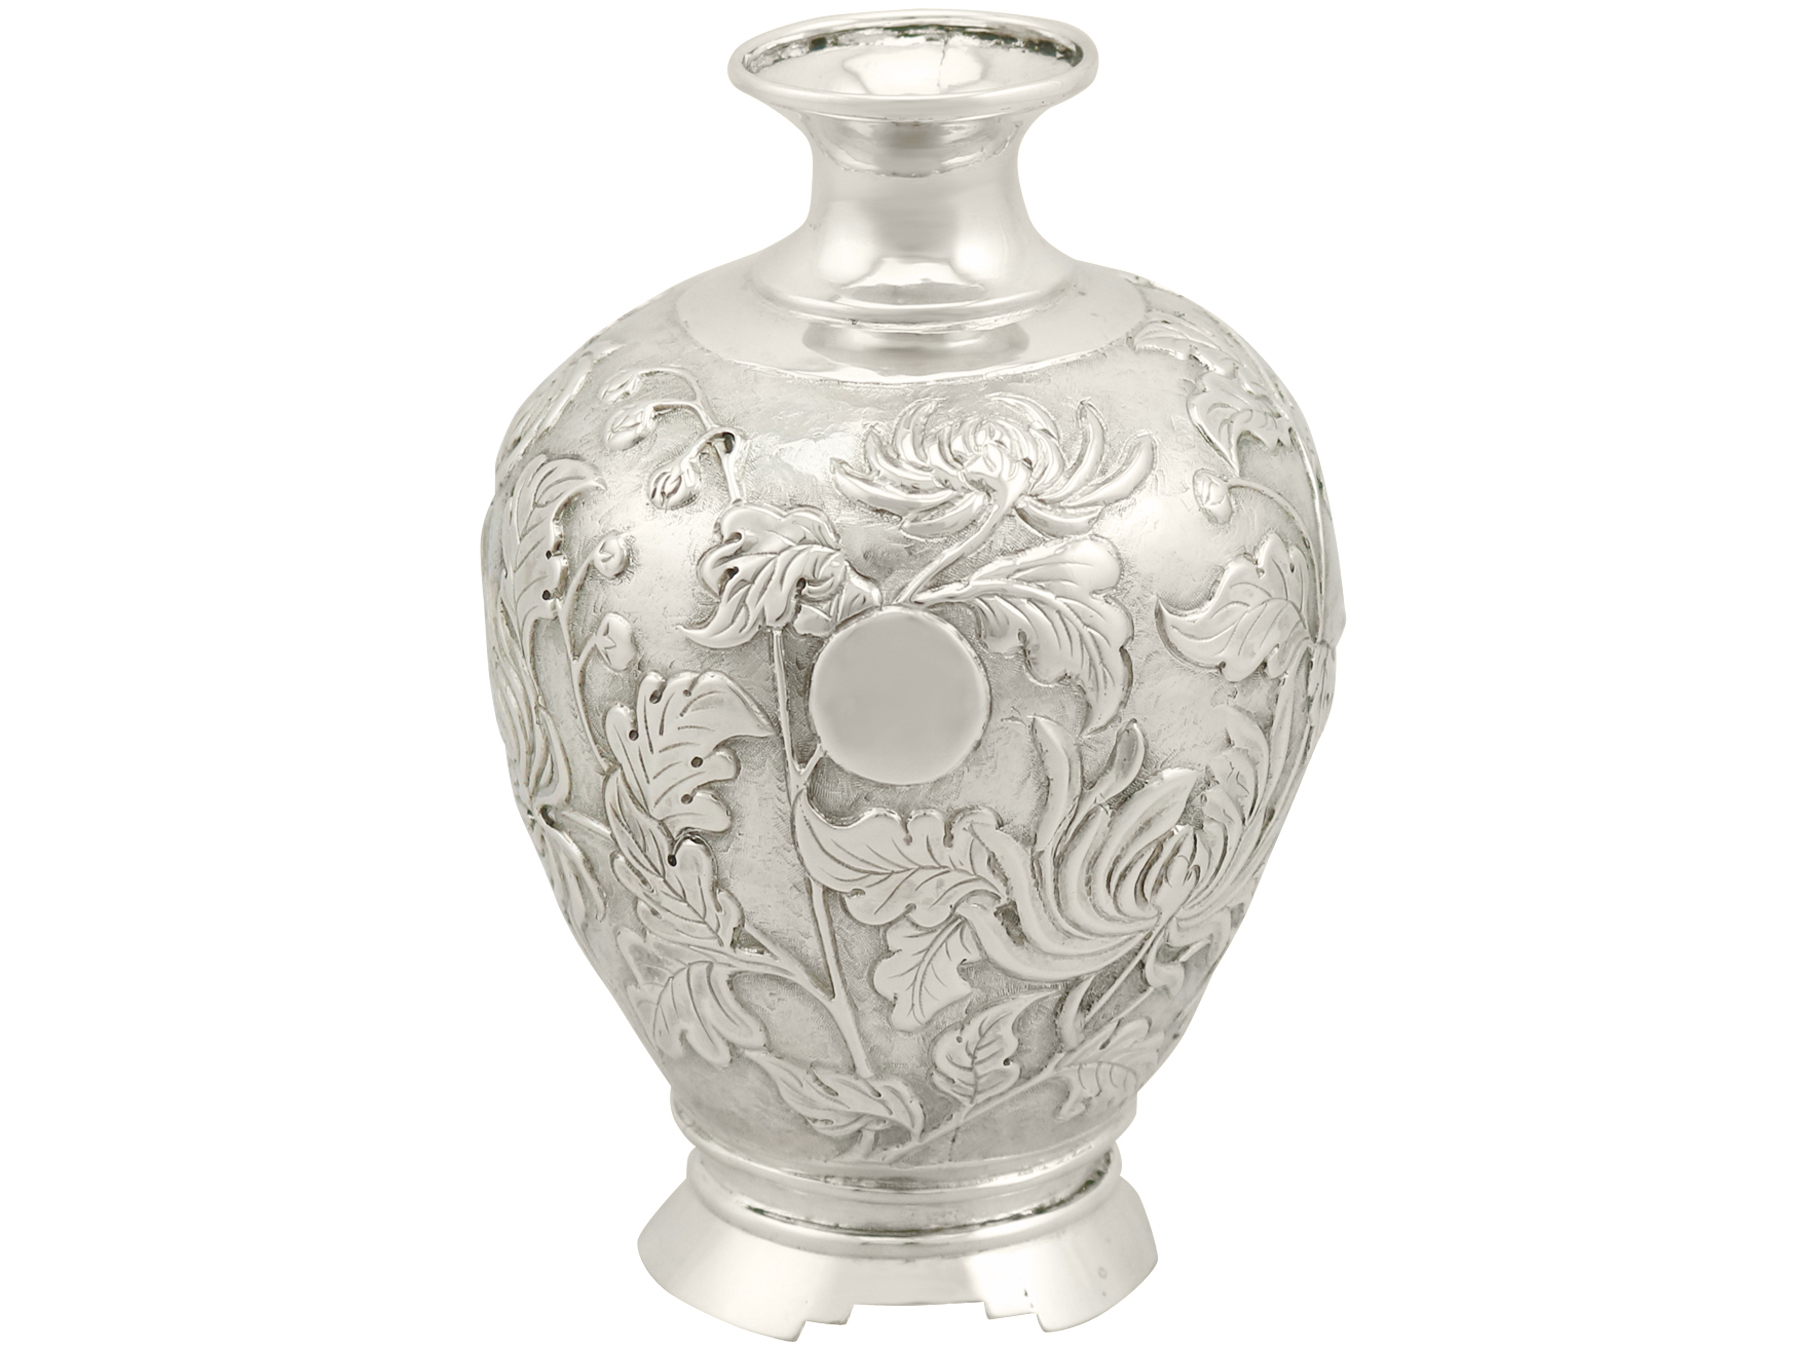 Most Valuable Antique Vases in the World